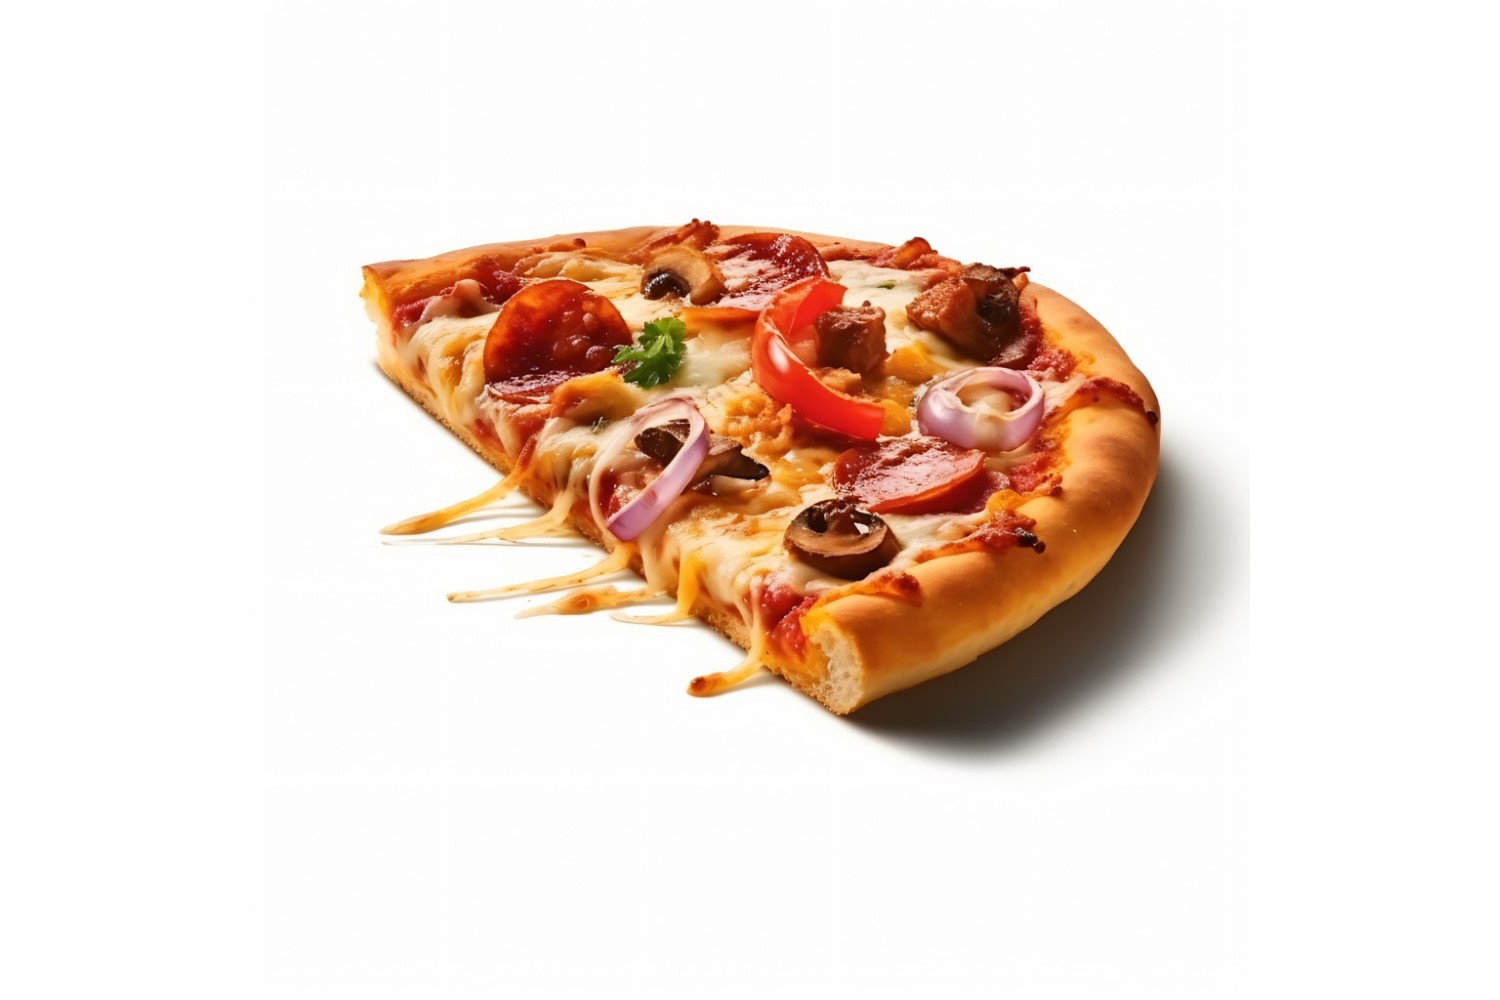 Half Meat Pizza On white background 73